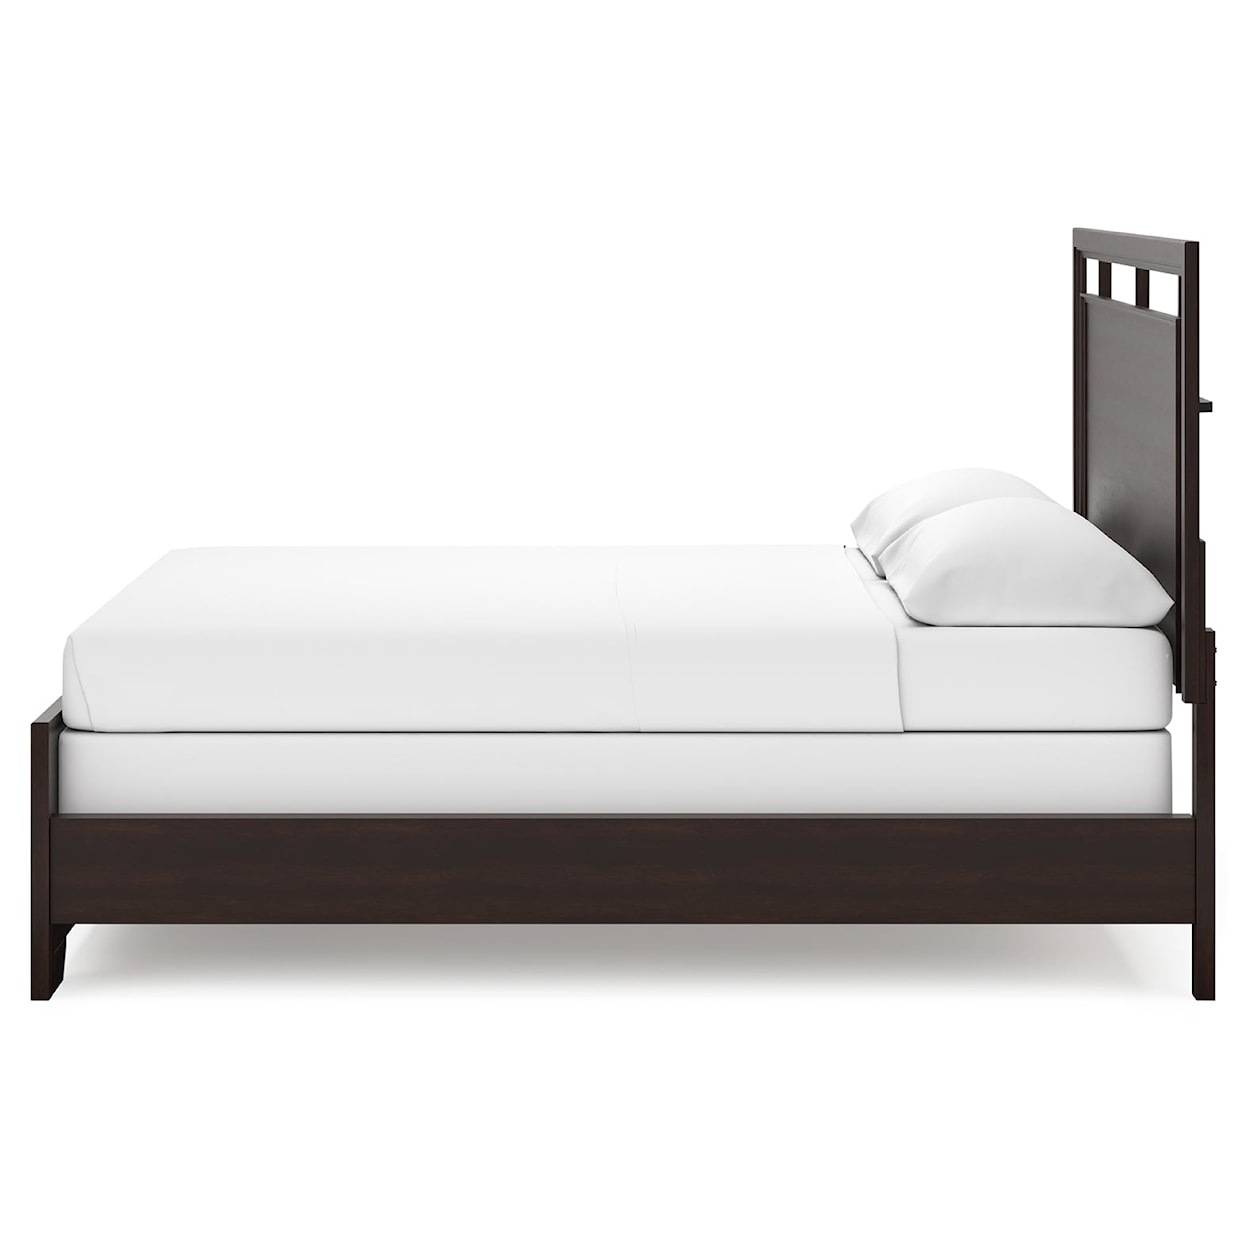 StyleLine Covetown California King Panel Bed